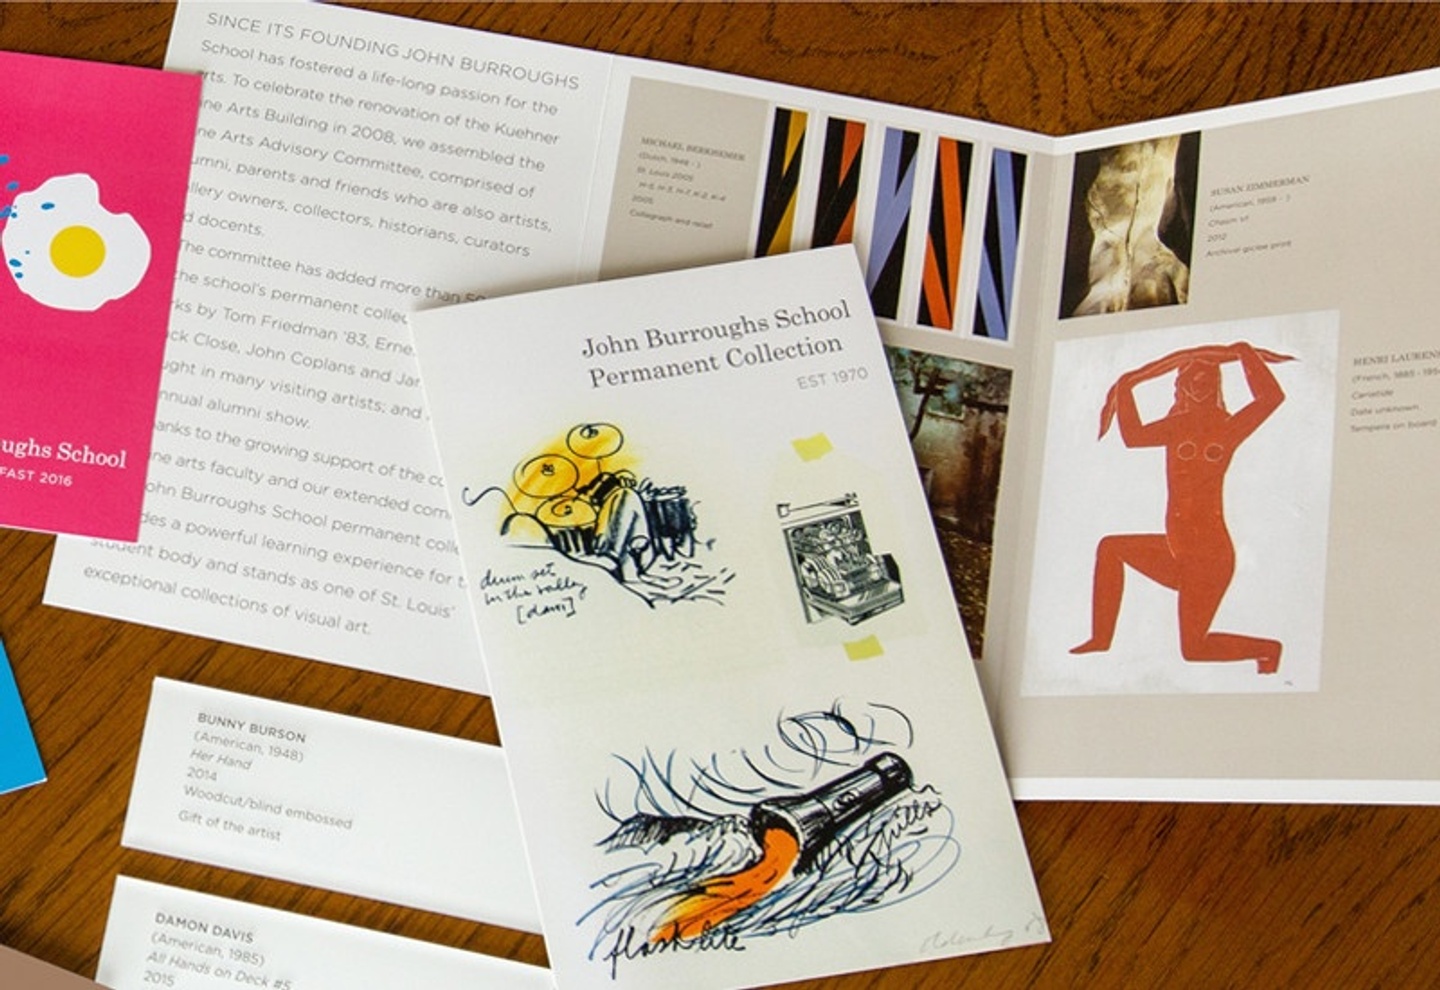 Catalog cover plus an interior spread promoting the permanent collection, featuring artworks in bold colors